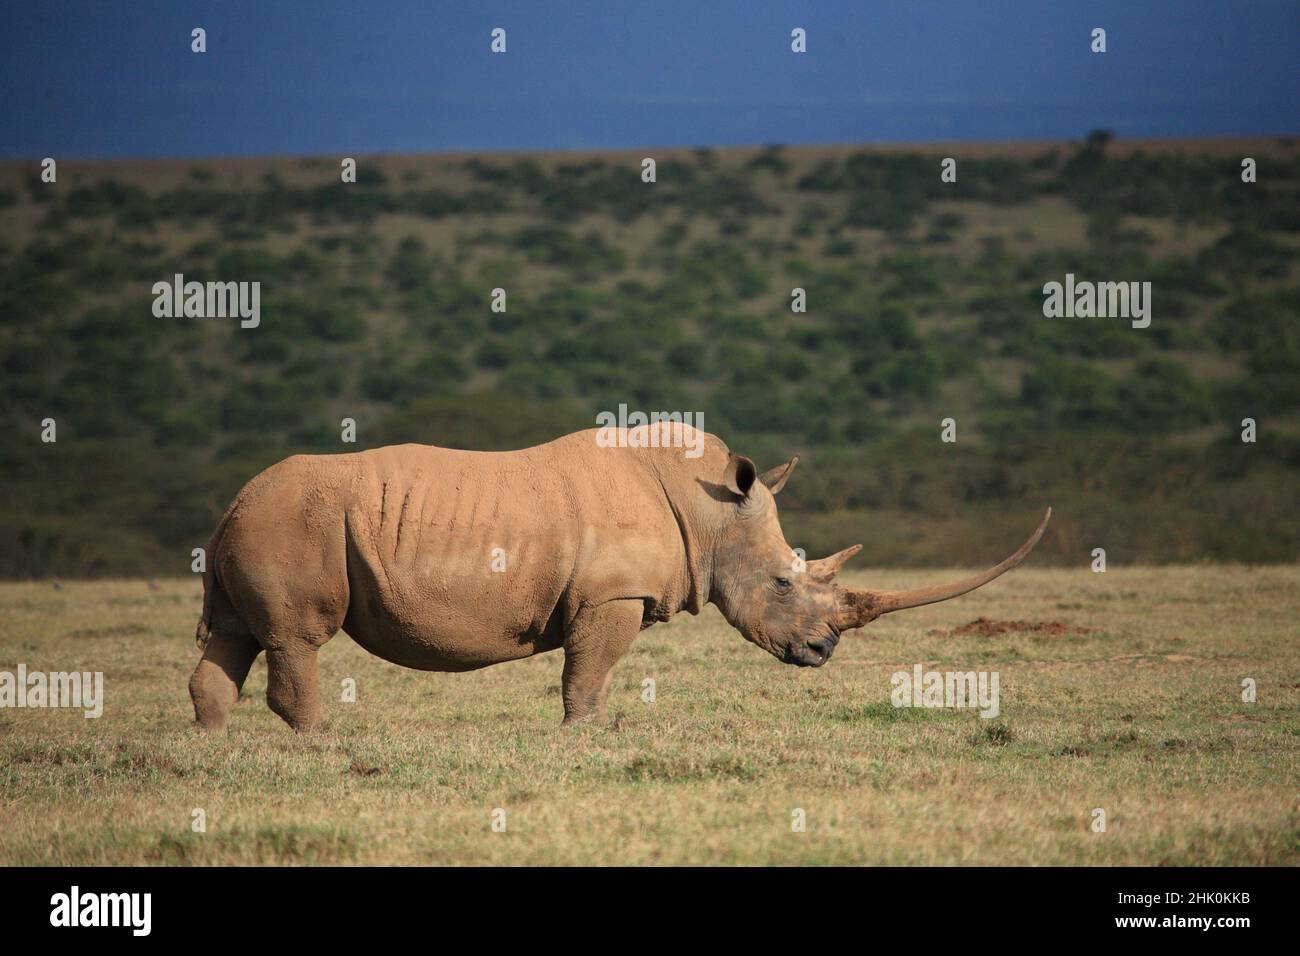 Black Rhinoceros with the longest Horn Africa still alive , Solio ranch Rift valley ,Kenya Stock Photo